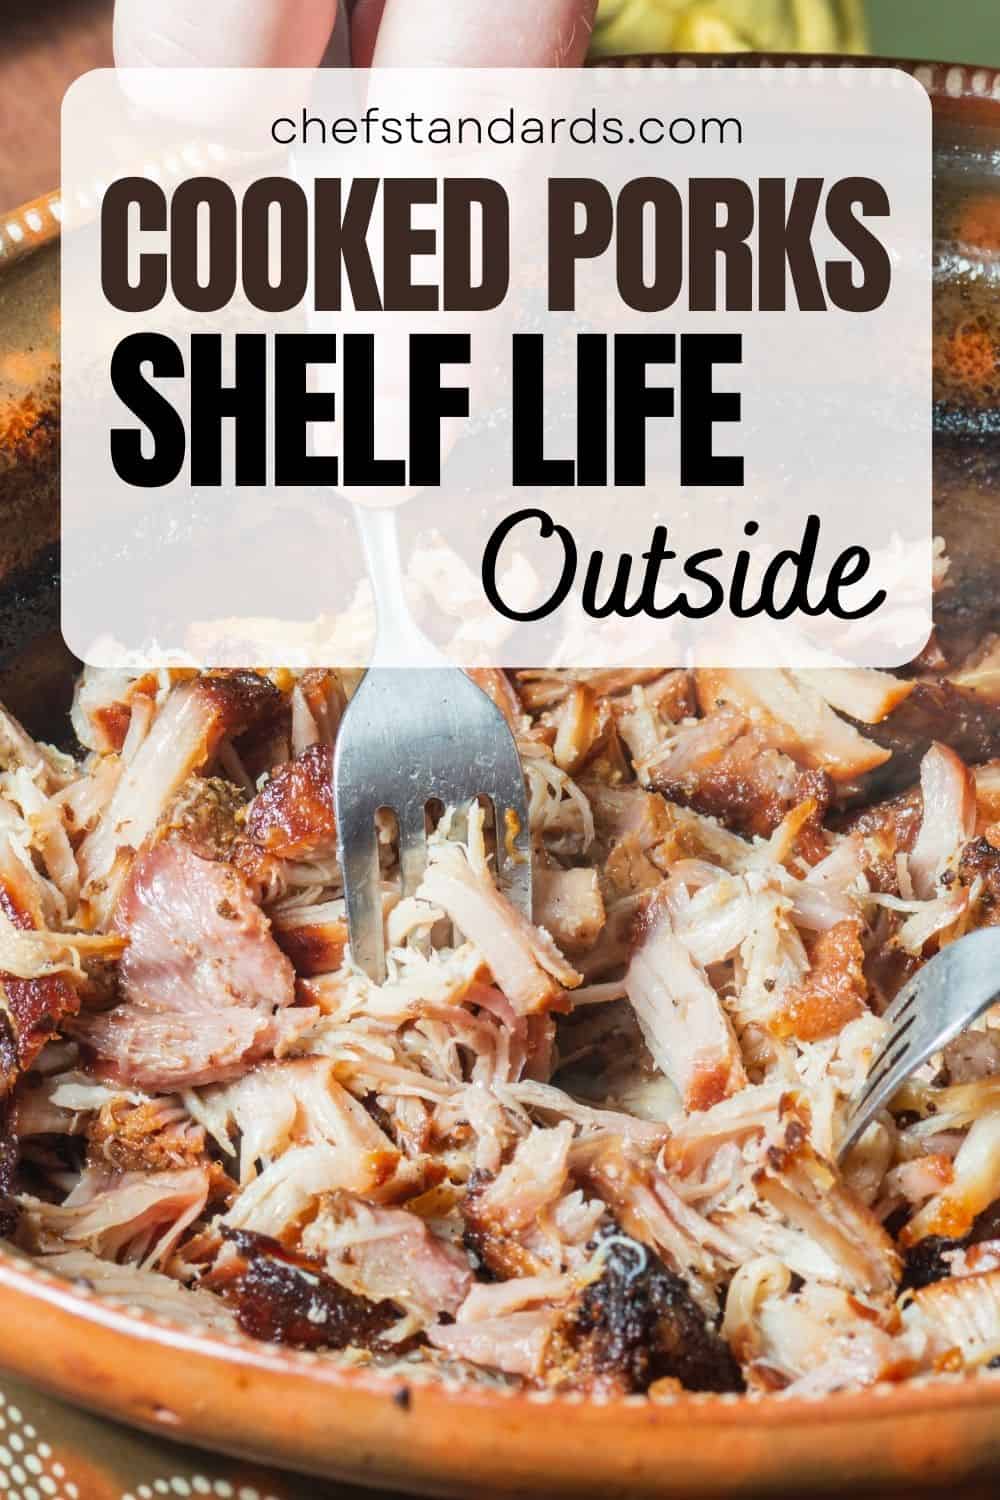 How Long Can Cooked Pork Sit Out + Main Storage Tips